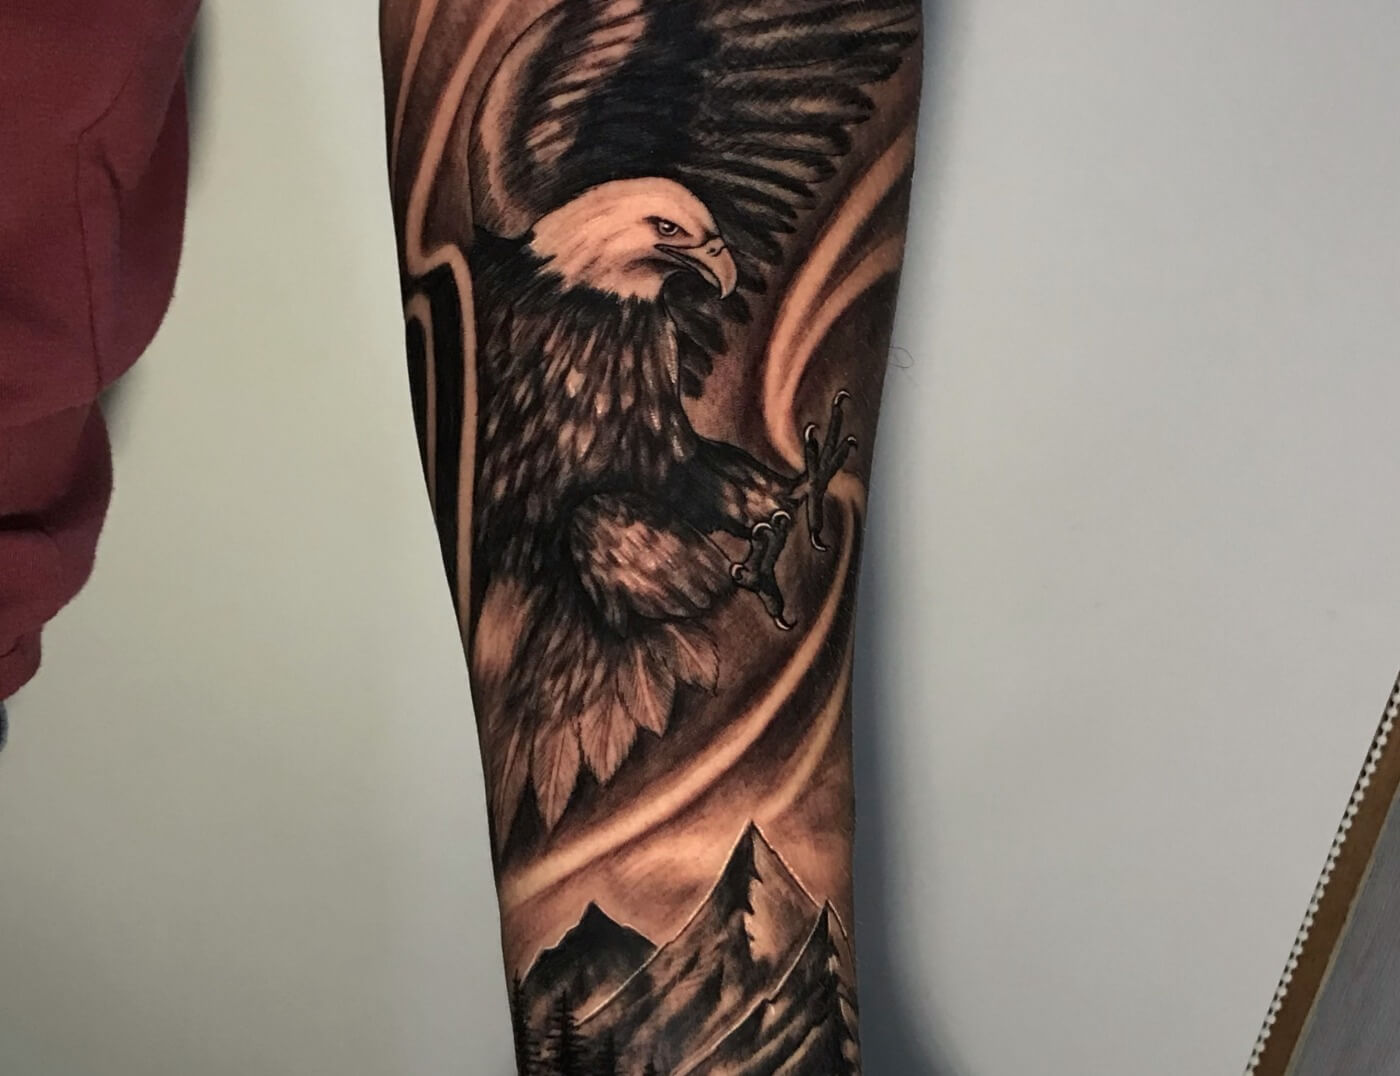 Eagle Soaring Over Mountains Black & Grey Photo Realism Tattoo By Rene Cristobal. Rene is a guest artist from Vision Tattoo Studio in Concepcion, Chile. He is available for booking July 3rd - 16th. We're open late night until 2AM. Call 404-973-728 or stop by for a free consultation.